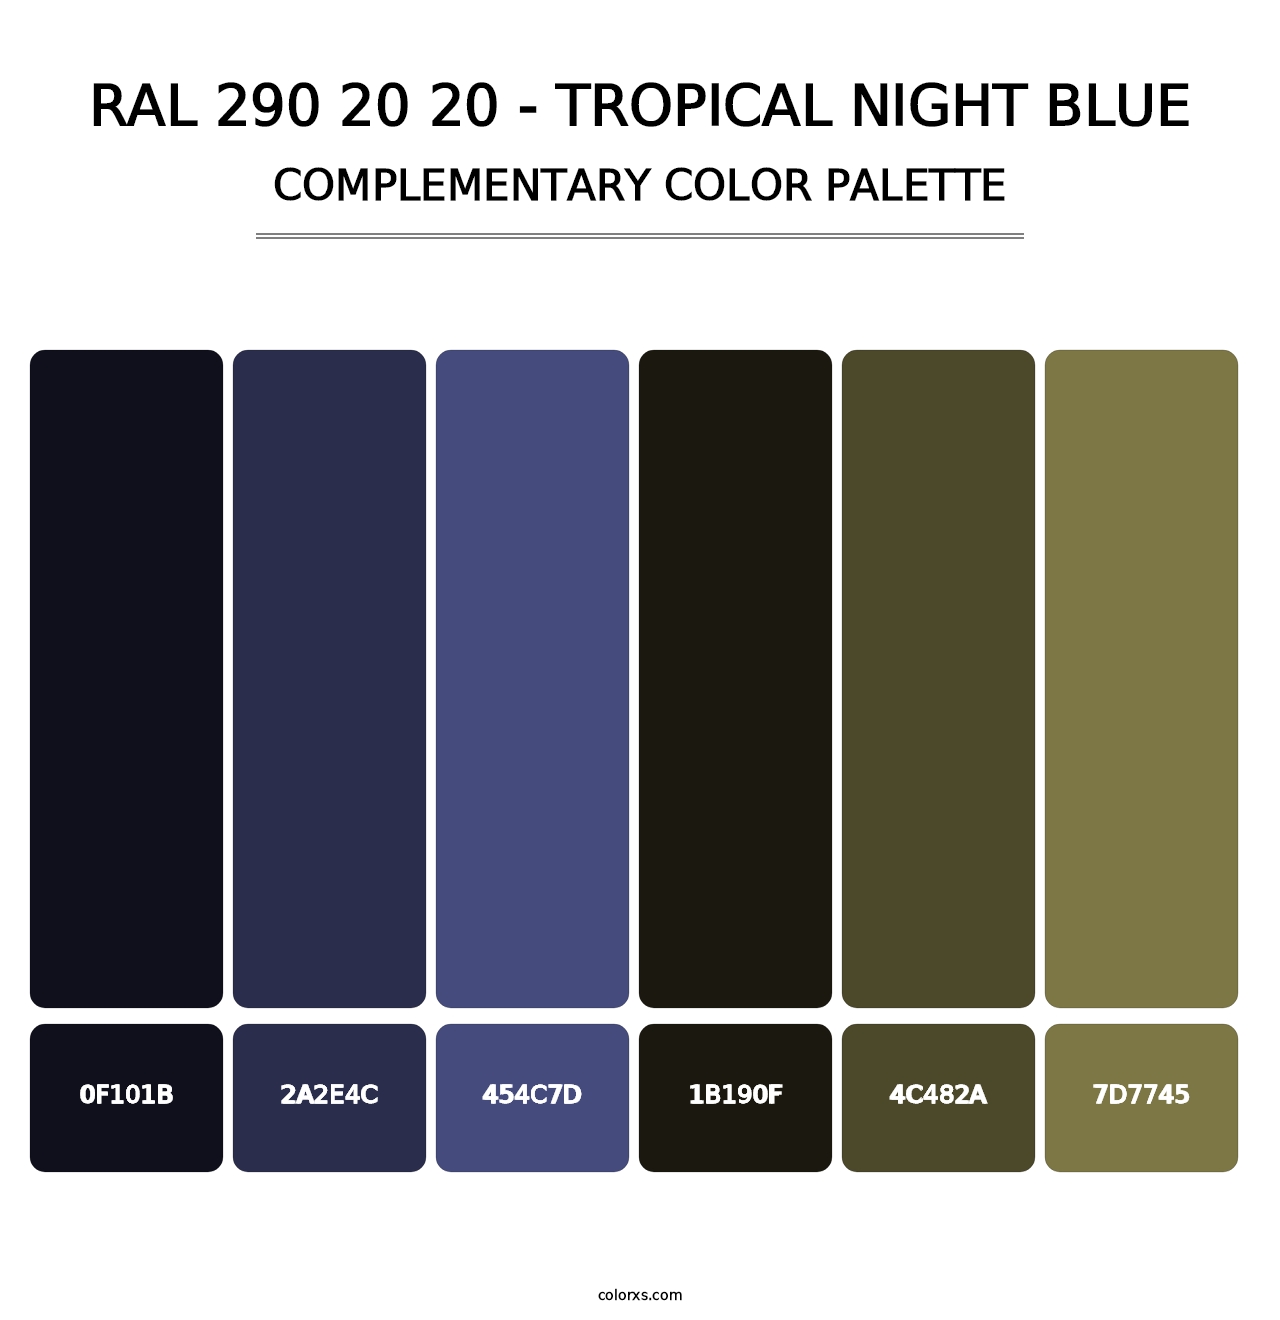 RAL 290 20 20 - Tropical Night Blue - Complementary Color Palette